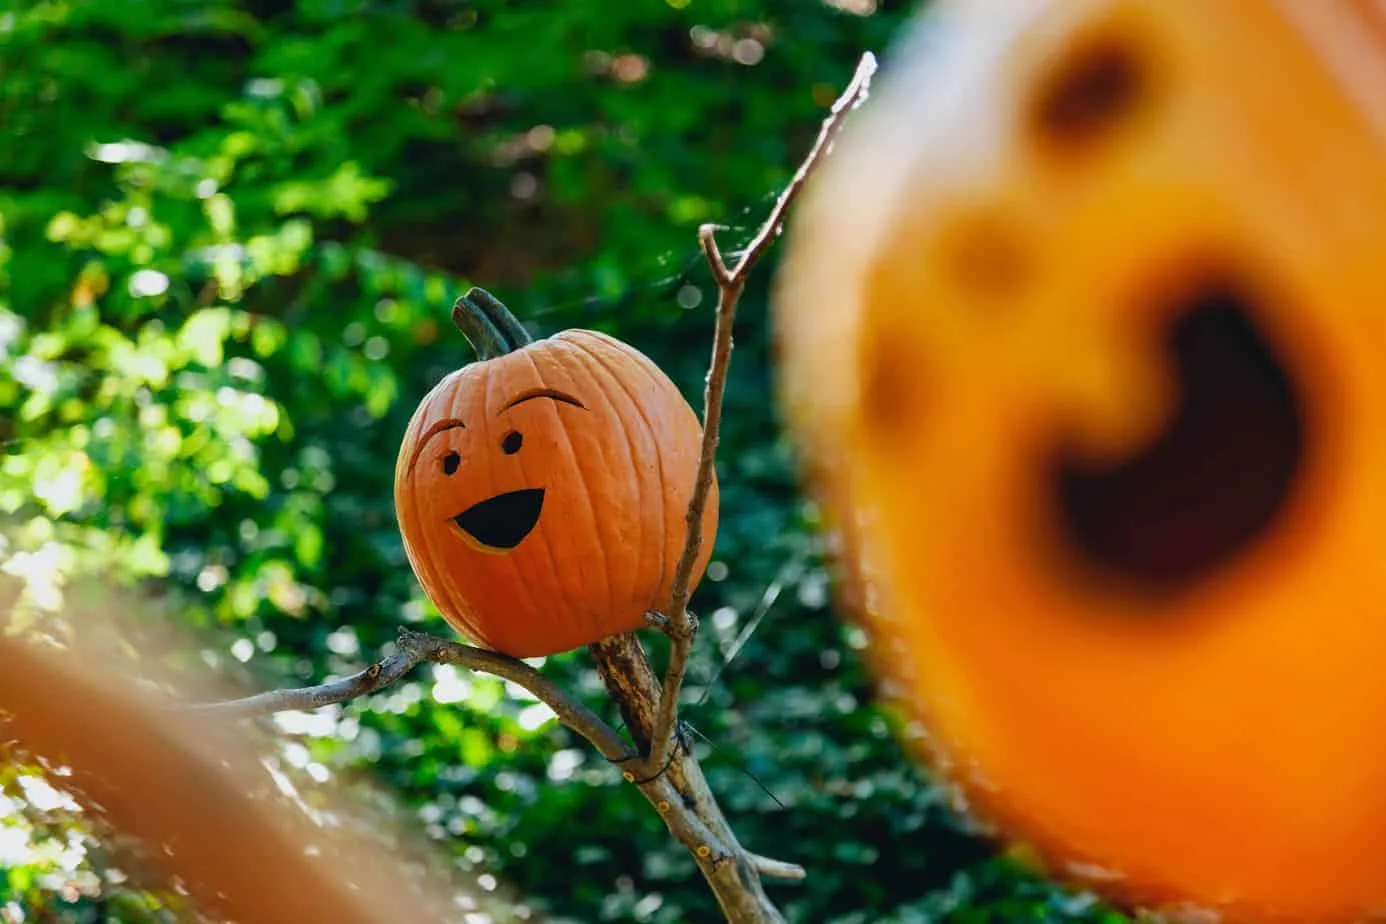 A picture of a funny looking Jack o lantern for halloween